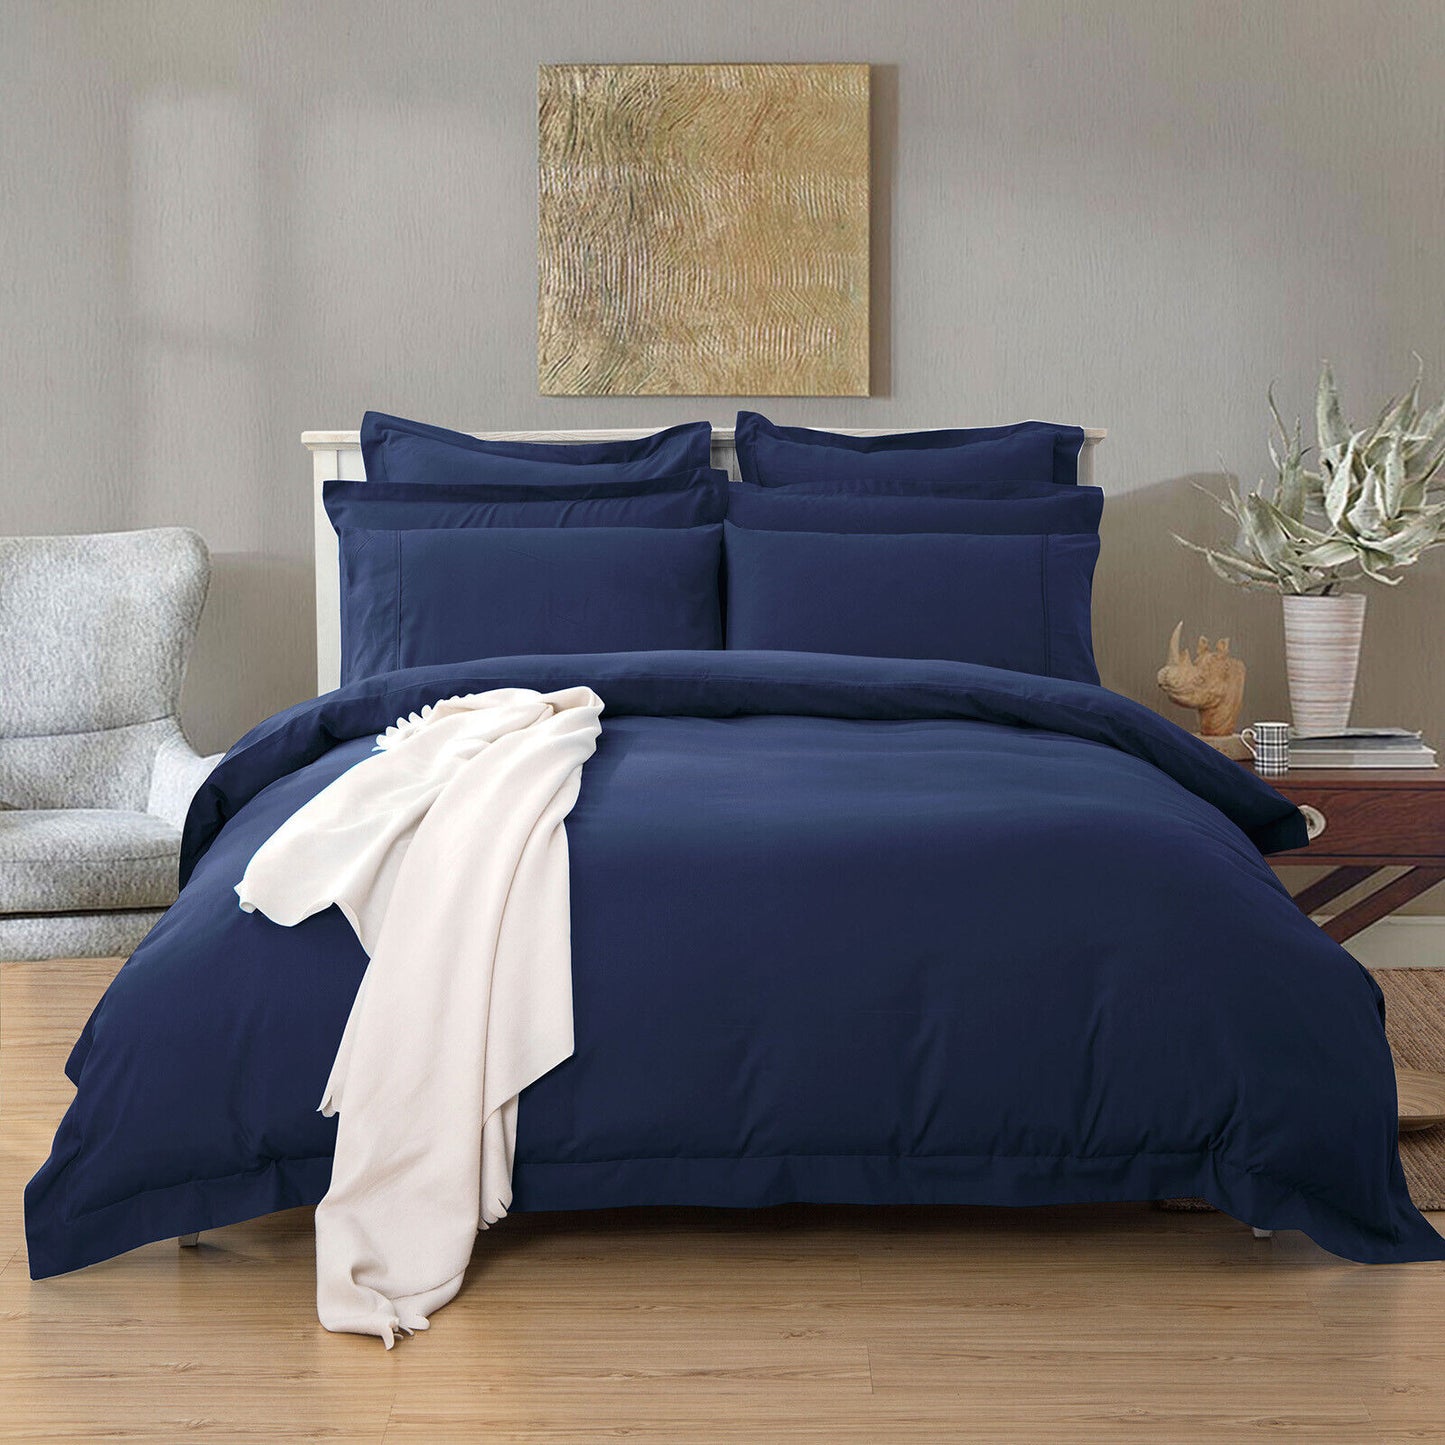 Tailored Ultra Soft 1000TC Duvet/Doona/Quilt Cover Set Collection Double Queen/King/Super King Size